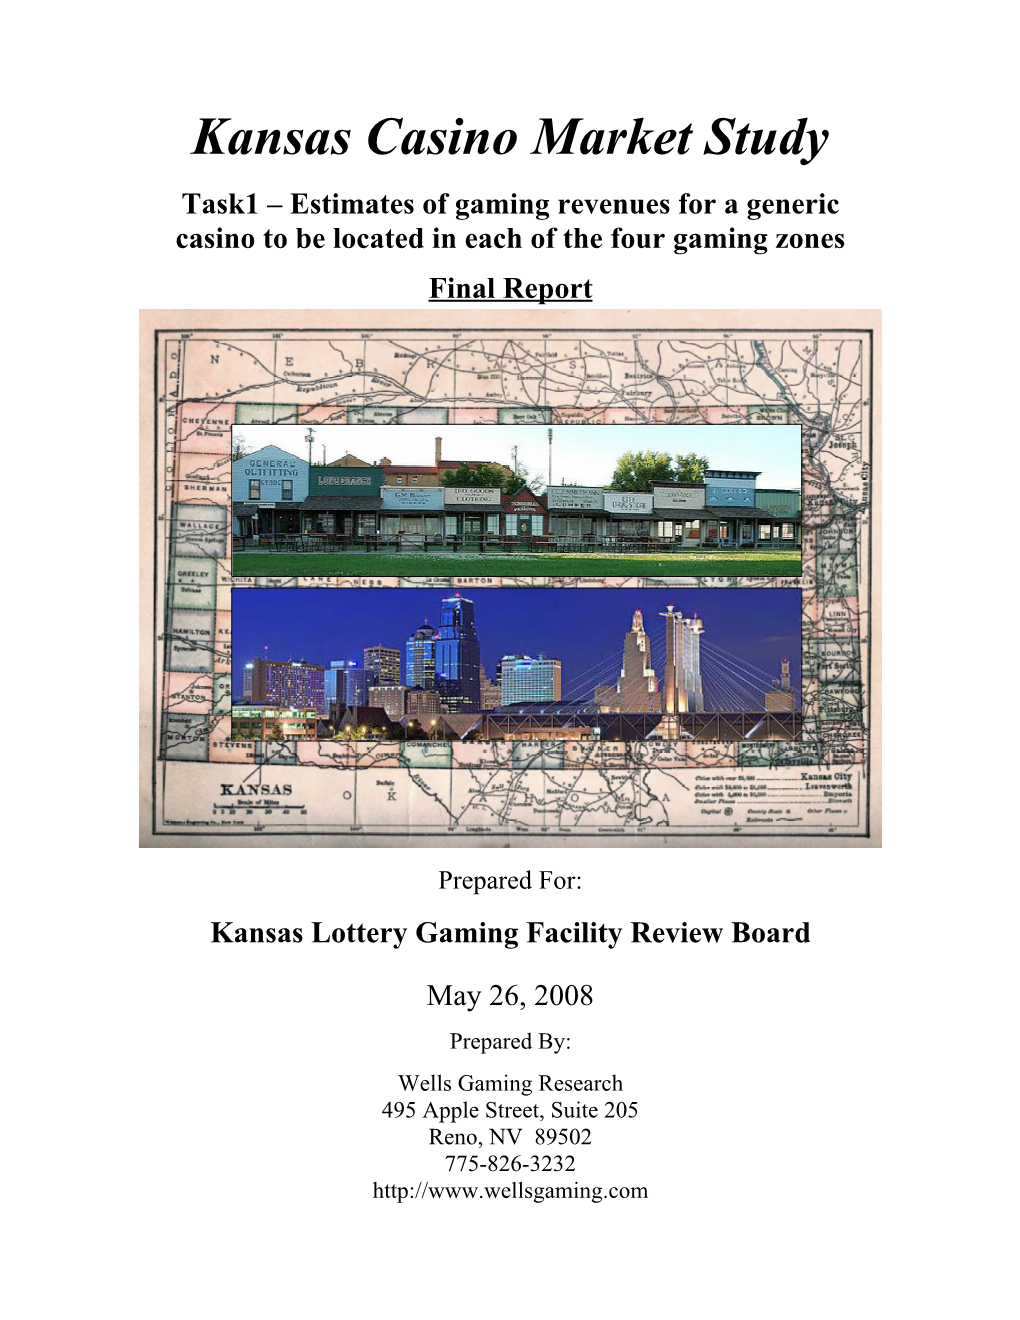 Kansas Casino Market Study Task1 – Estimates of Gaming Revenues for a Generic Casino to Be Located in Each of the Four Gaming Zones Final Report